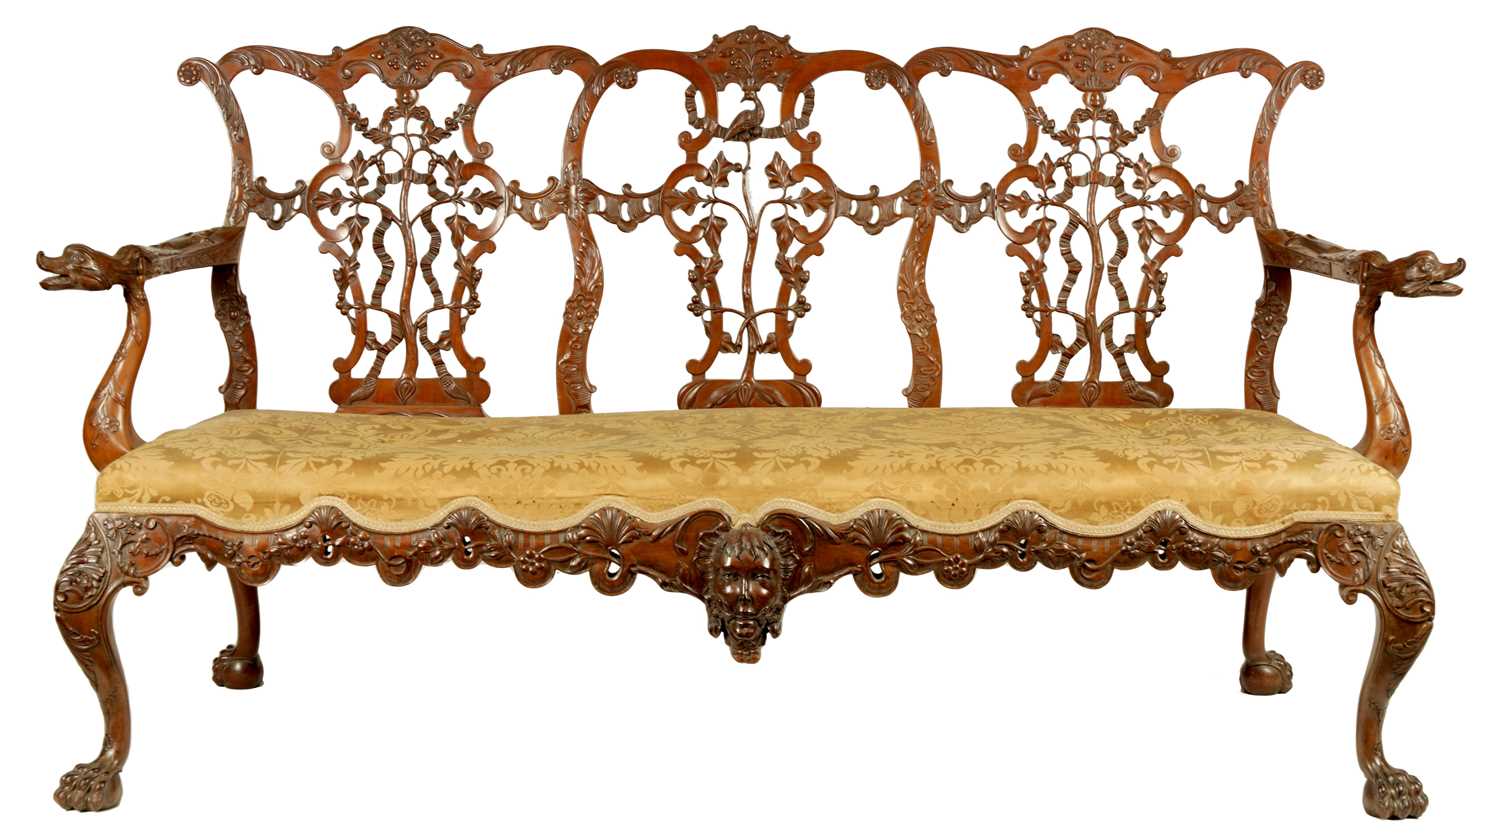 Lot 966 - AN EARLY 20TH CENTURY, MID 18TH CENTURY IRISH STYLE THREE SEATER CARVED MAHOGANY SETTEE